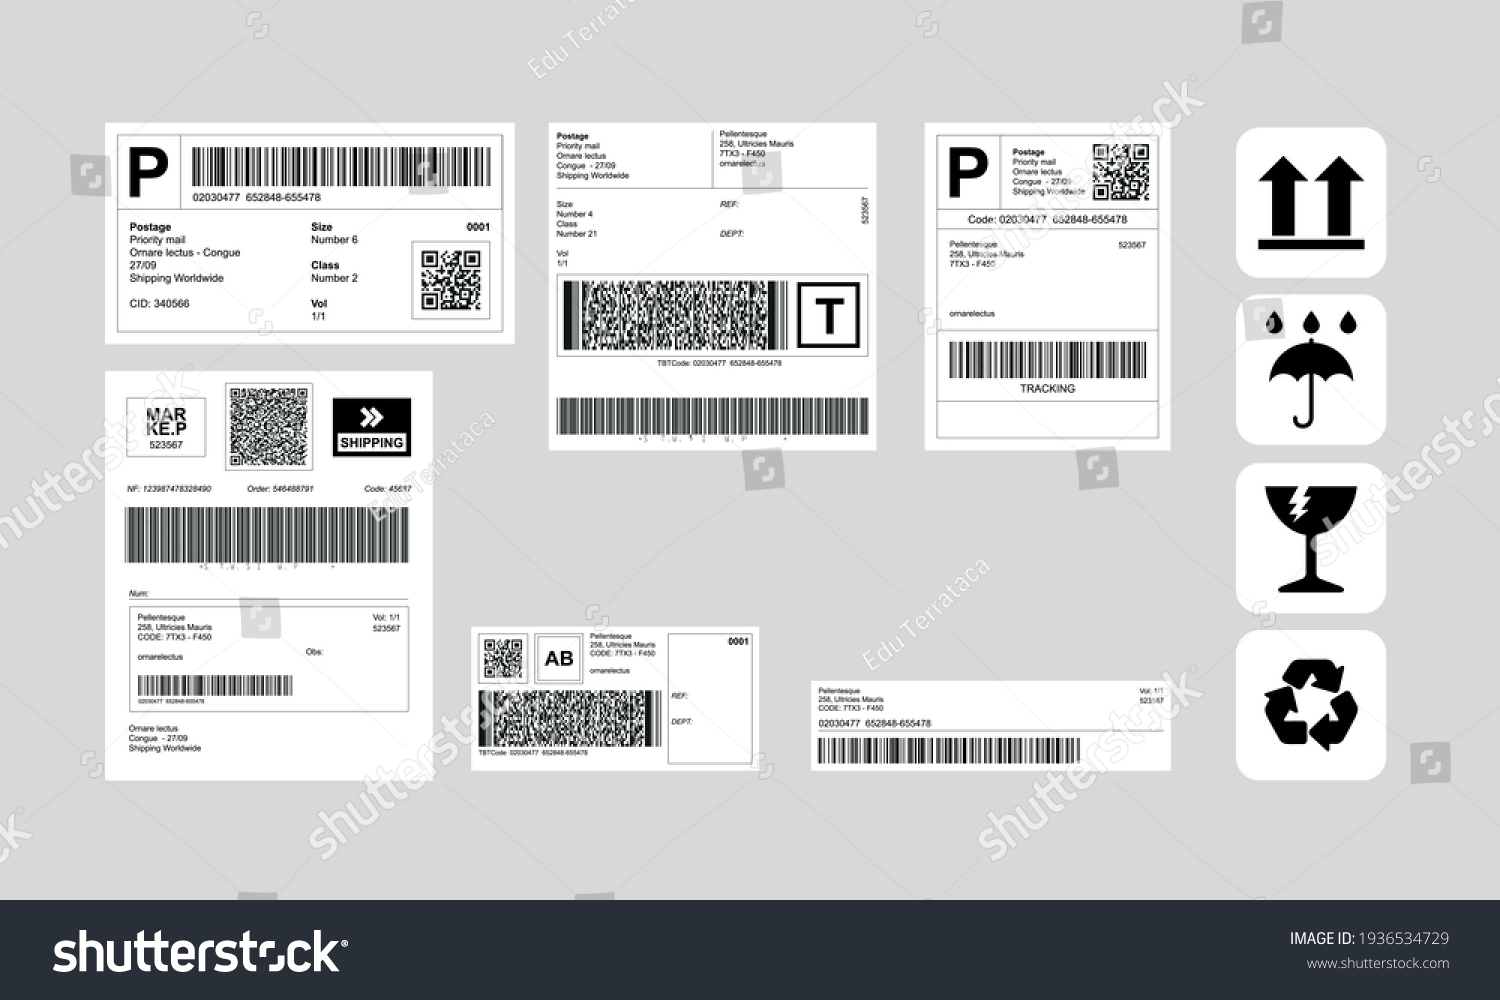 Barcode Label Delivery Template + Set of Cargo Icons, Fragile, Recycle, Stickers #1936534729